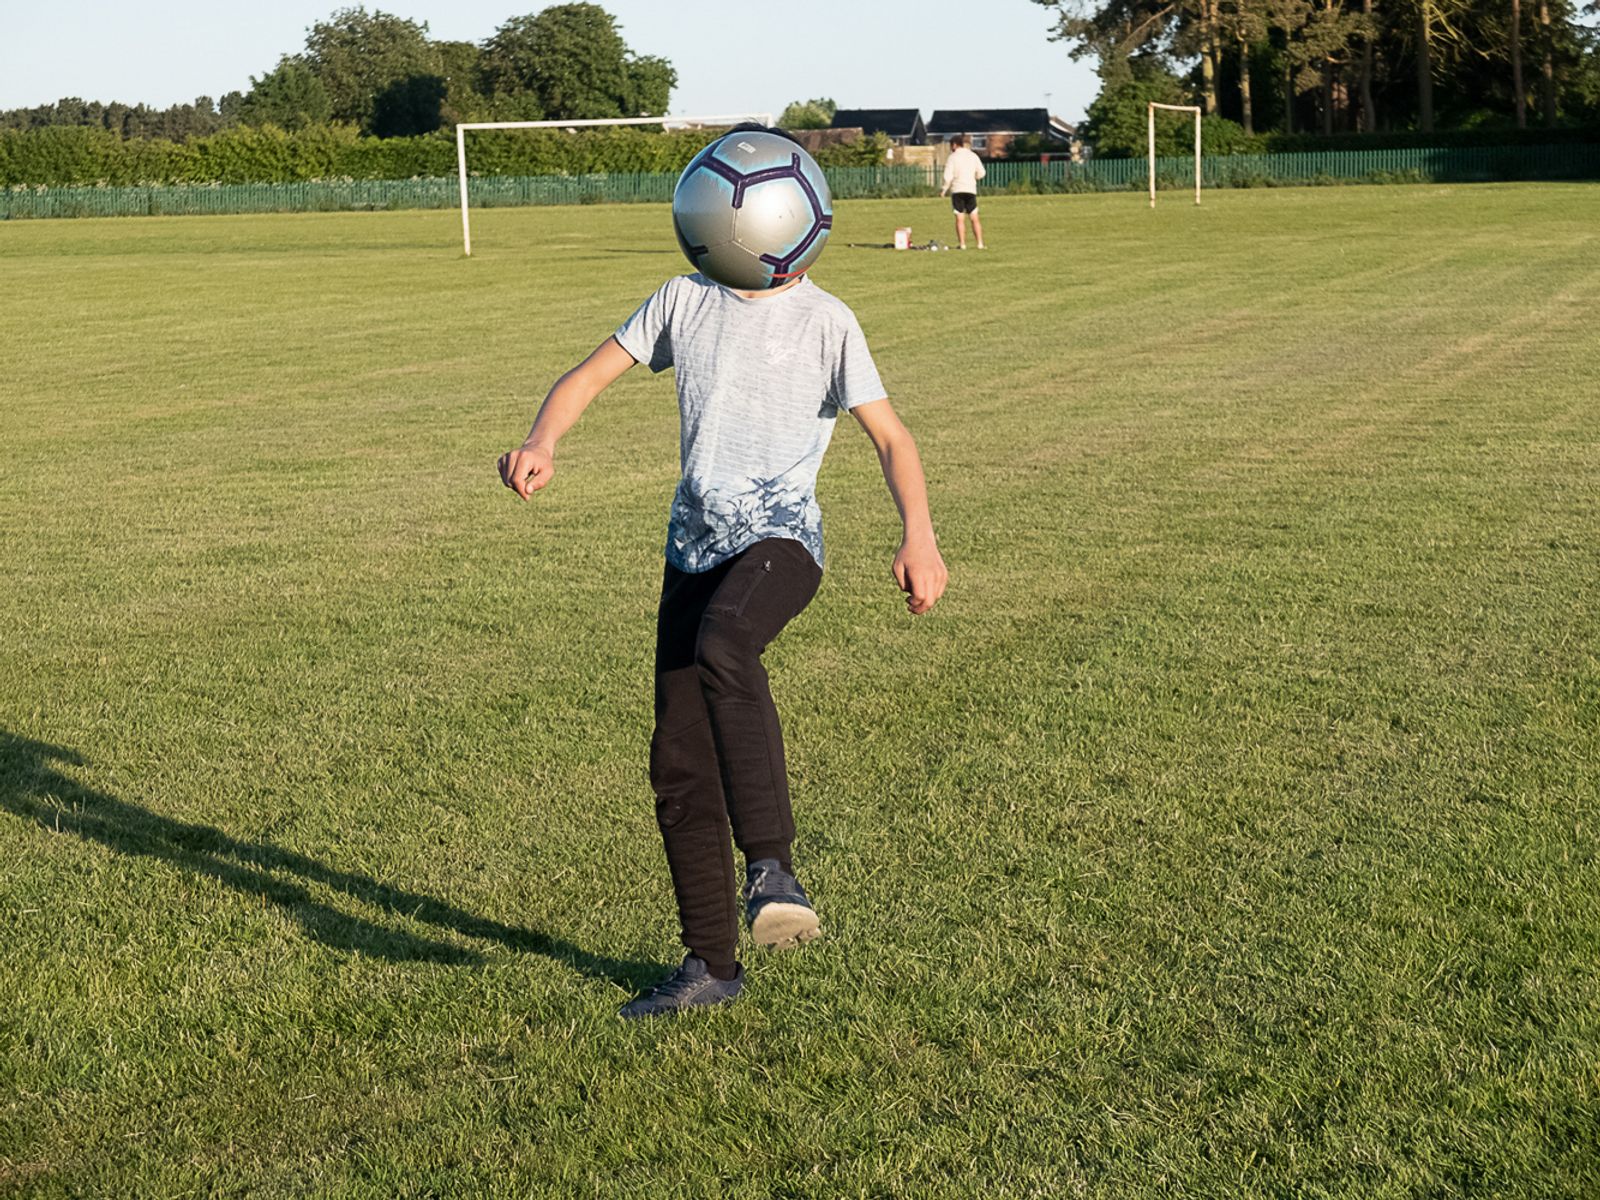 © Rich Wiles - Photo by Ruba al-Hindawi. Mustapha playing football in the local park.